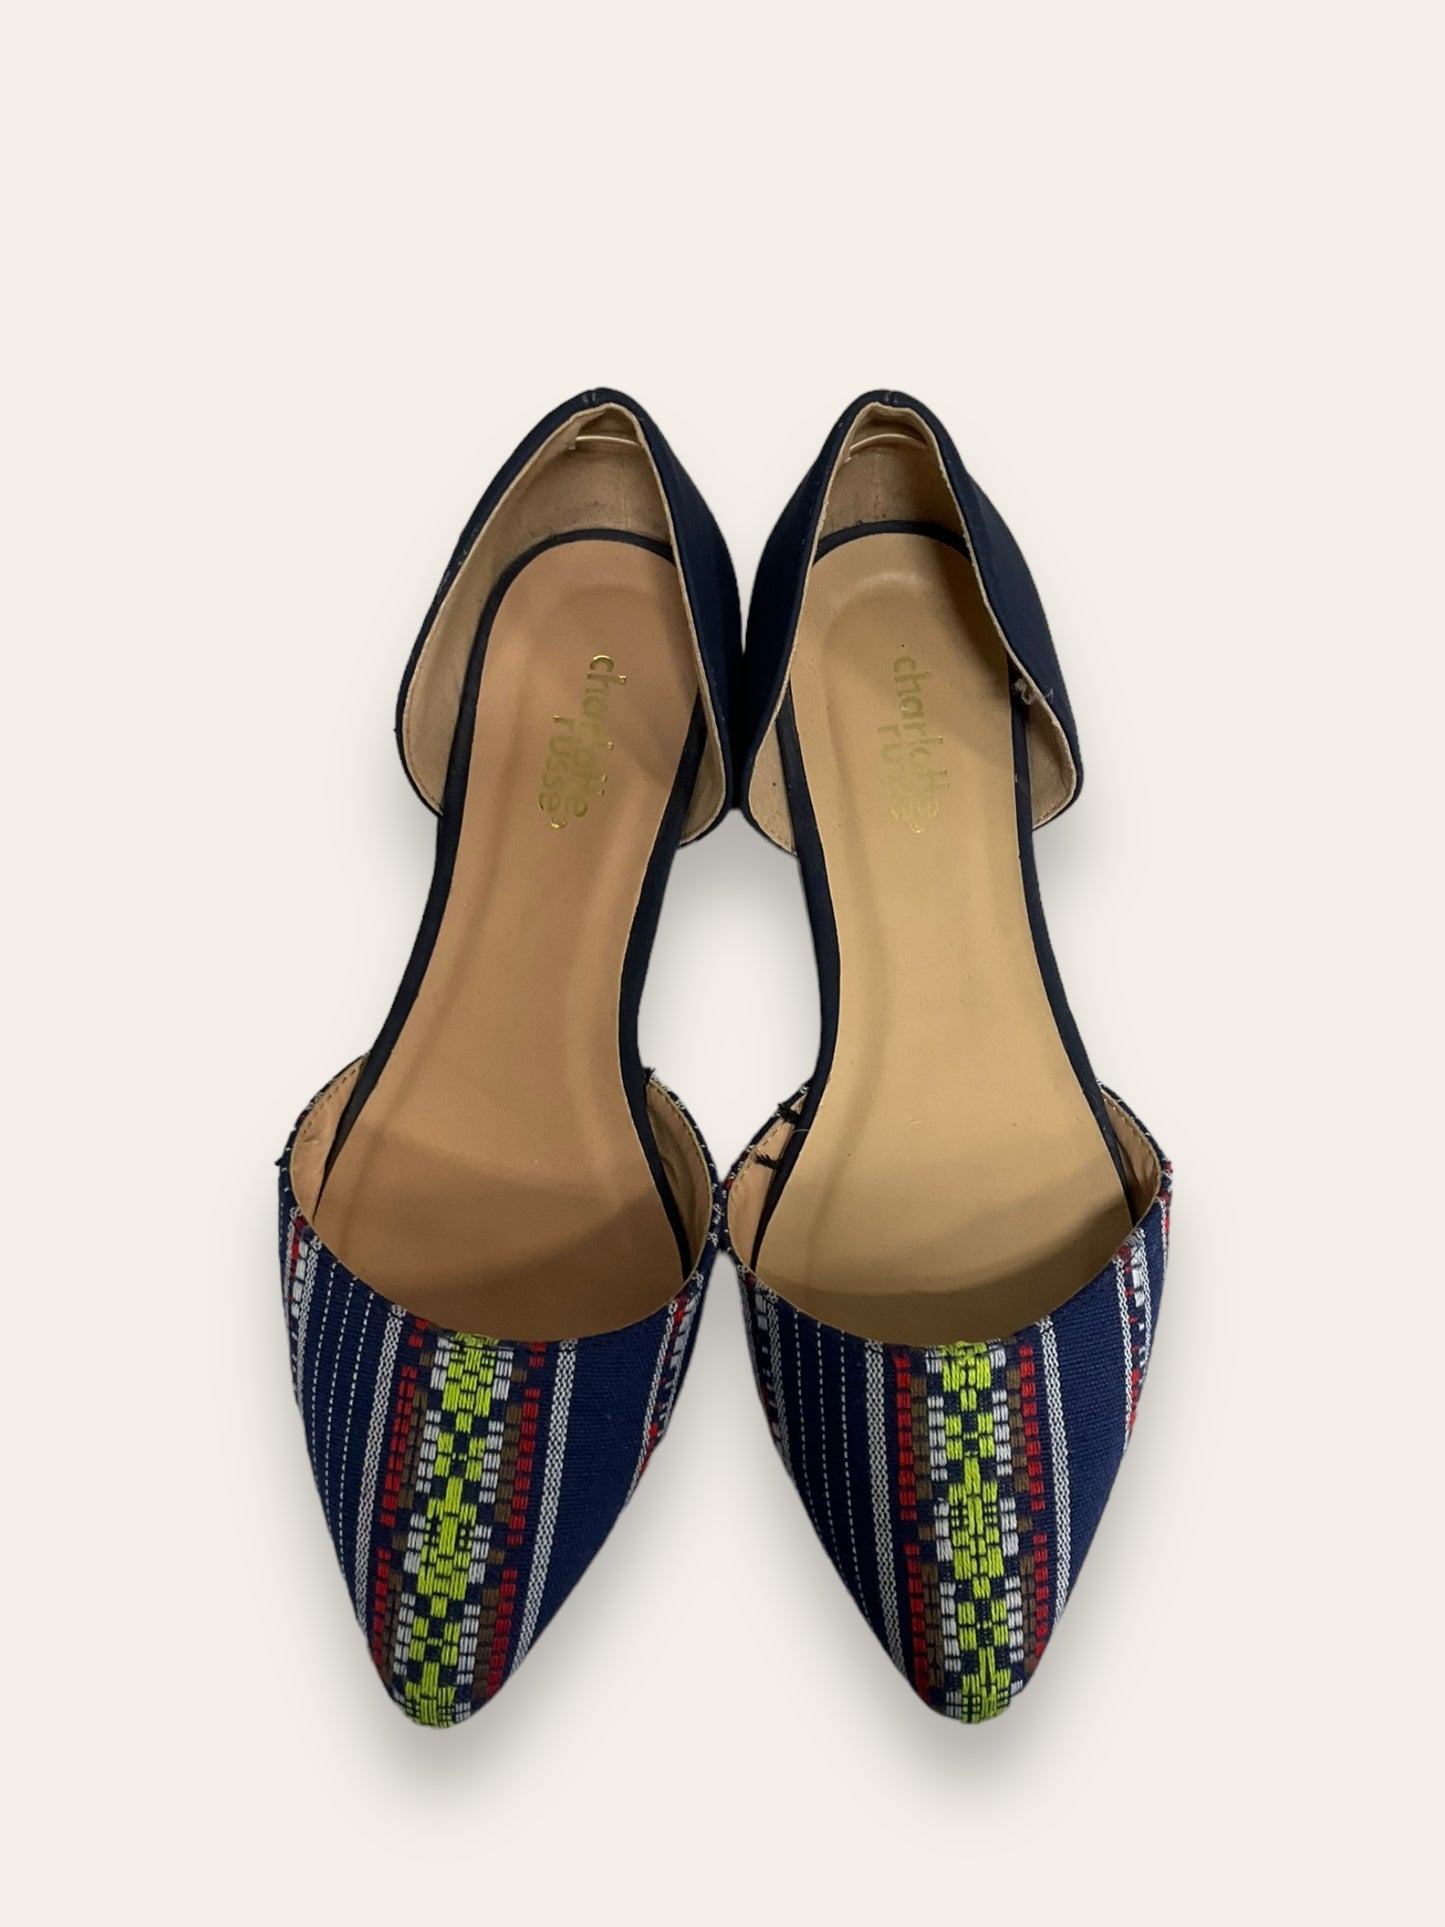 Shoes Flats By Clothes Mentor  Size: 7